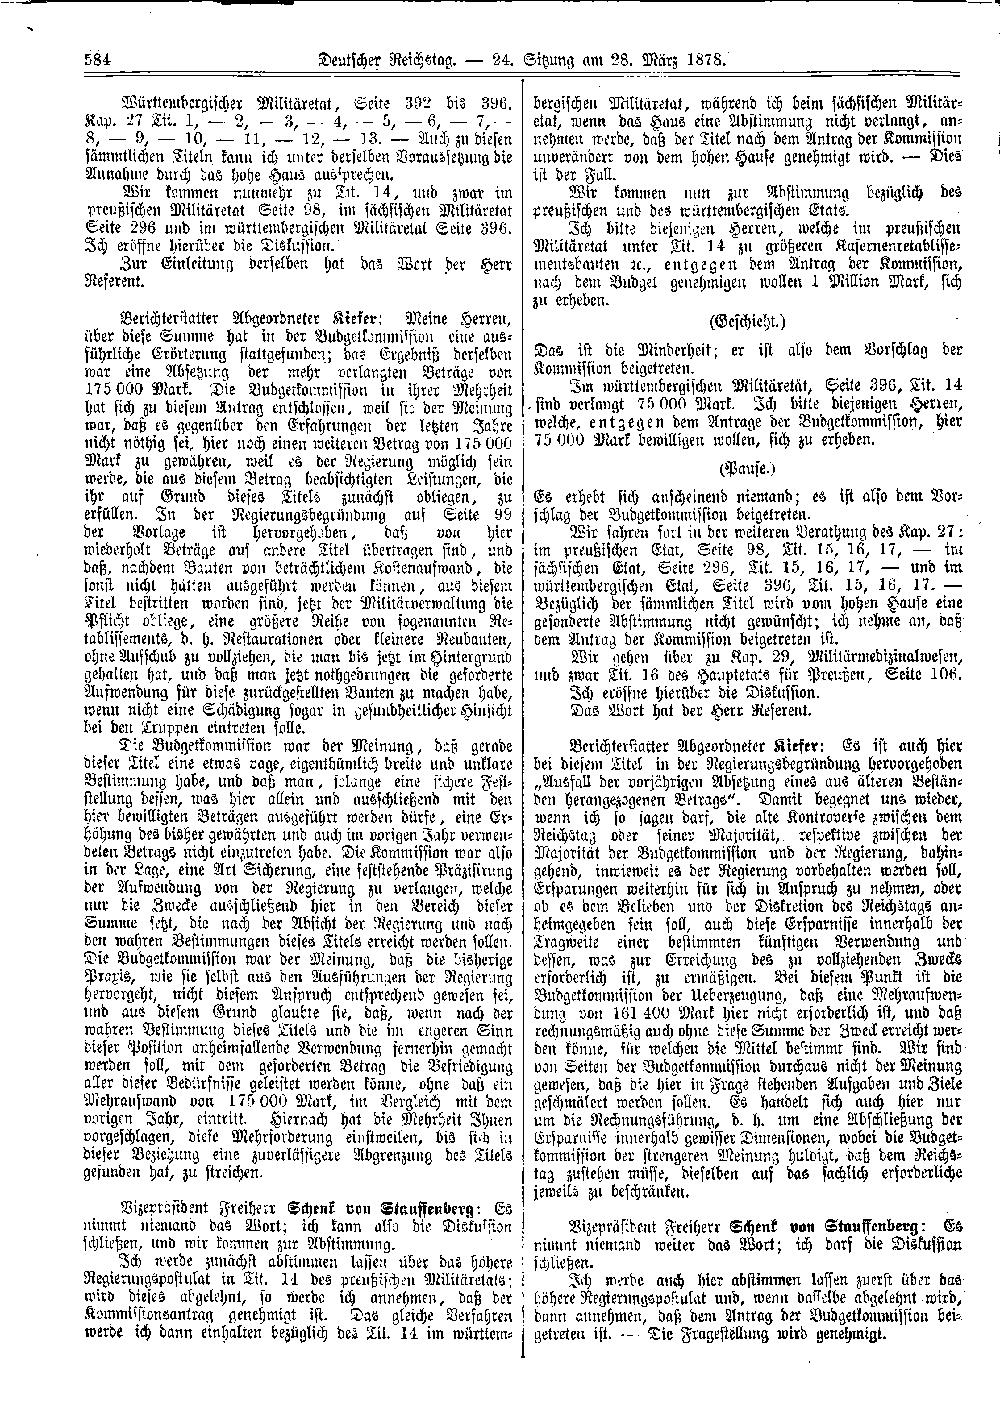 Scan of page 584